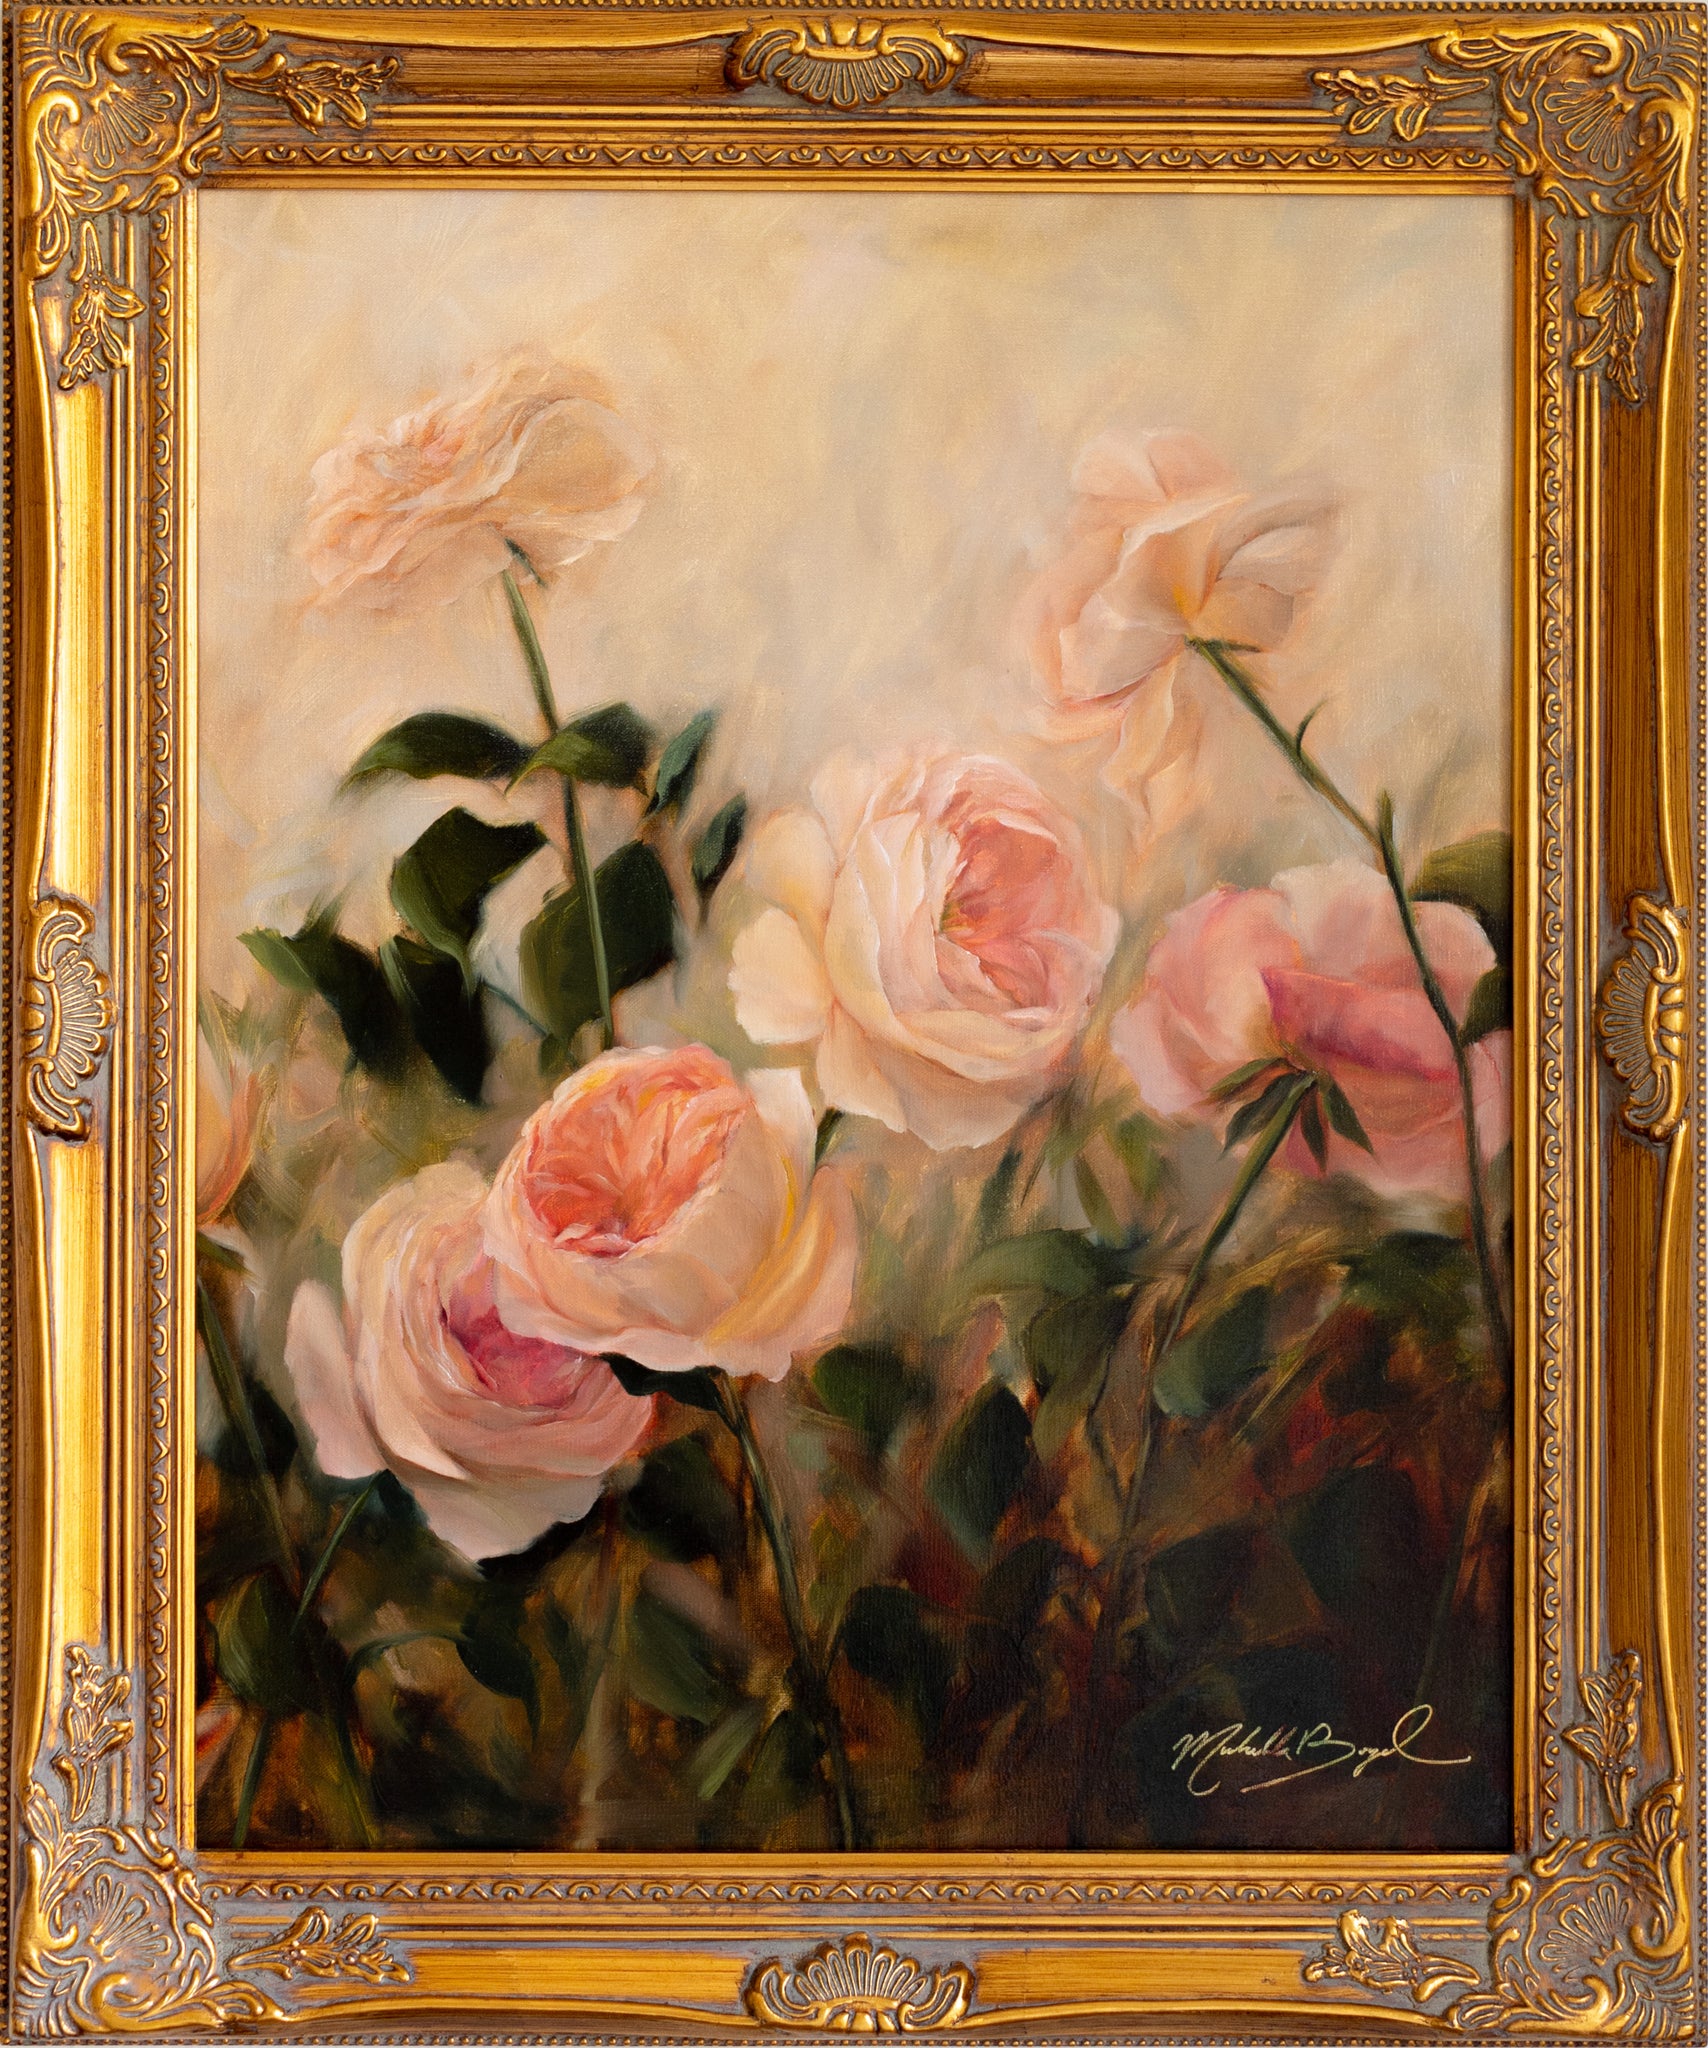 Buckets of Blooms  - 16x20" Framed Oil Painting